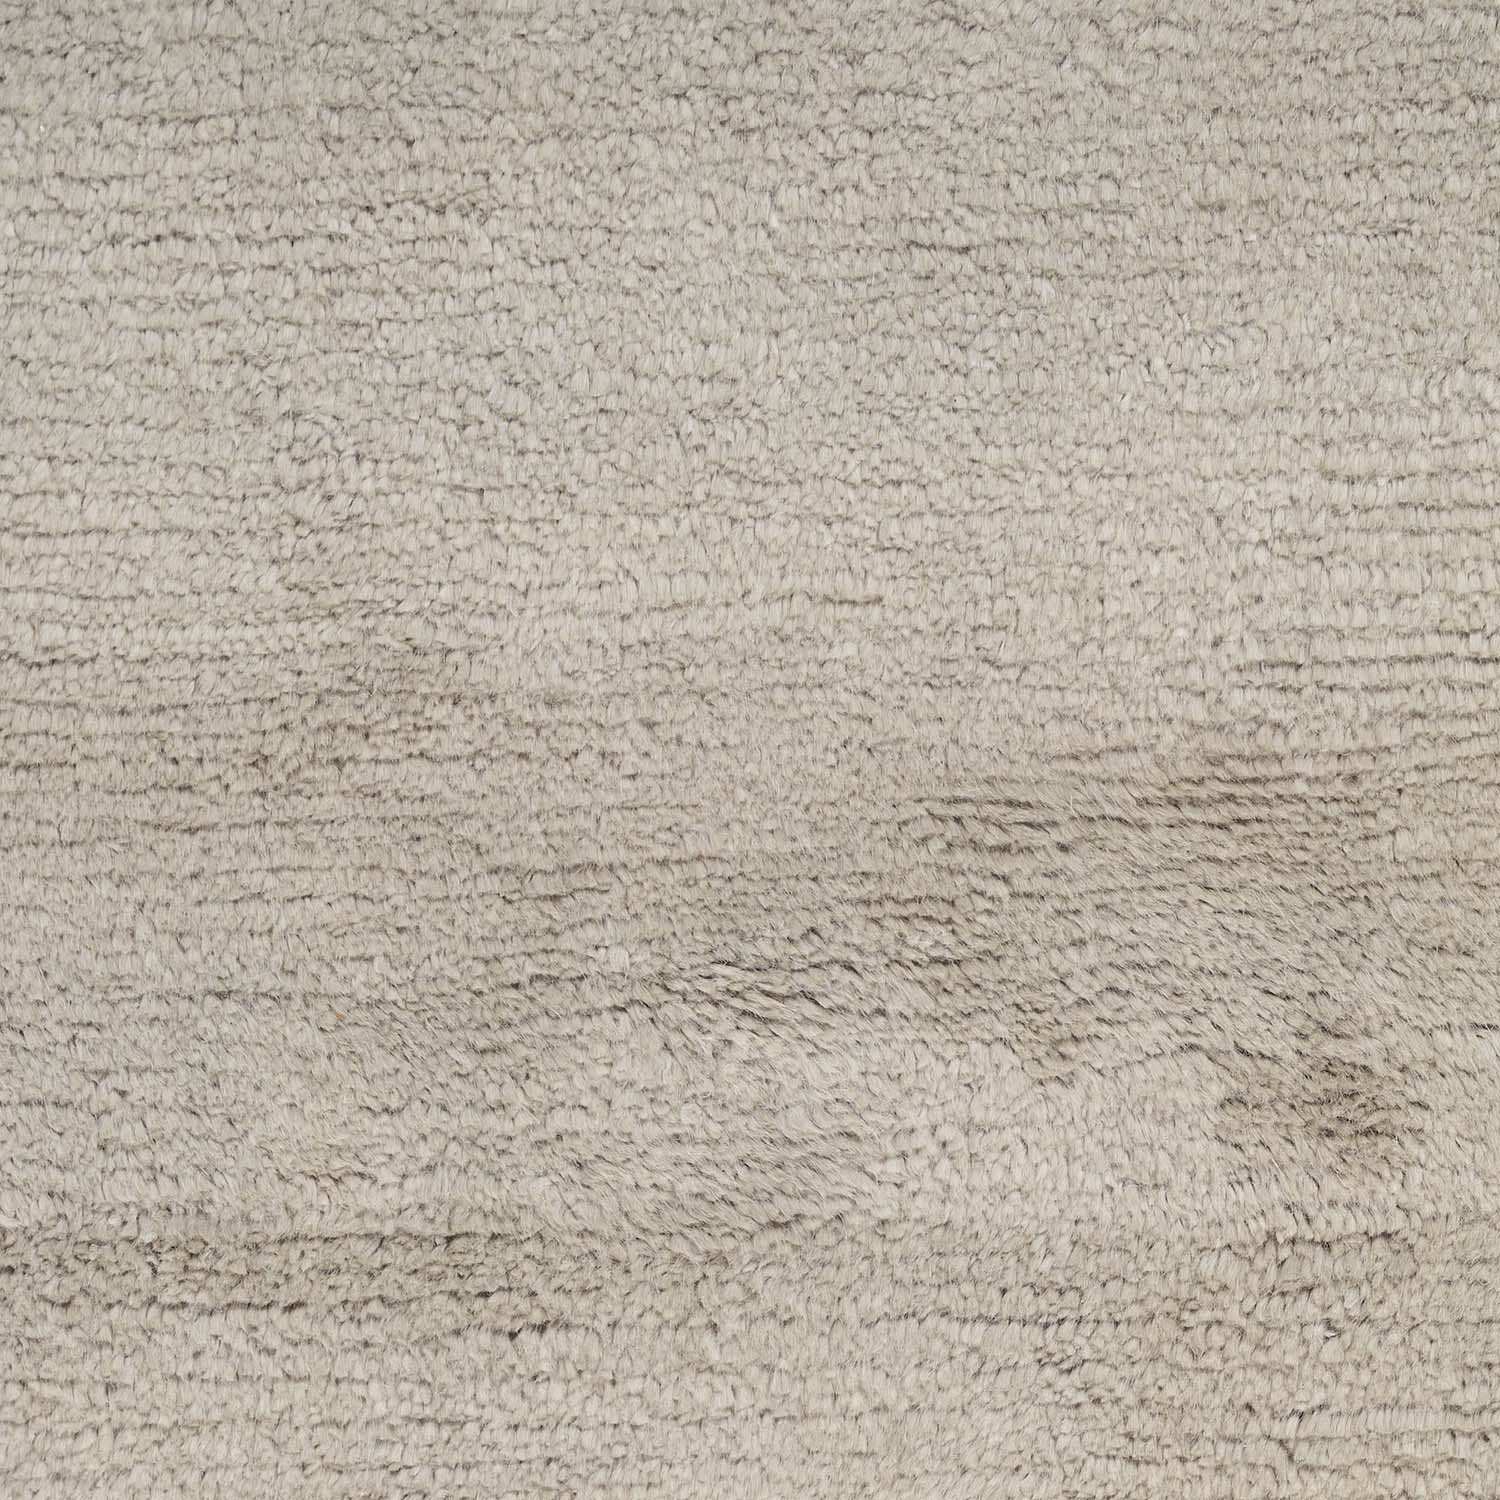 Close-up view of a plush, neutral-colored carpet with subtle texture.